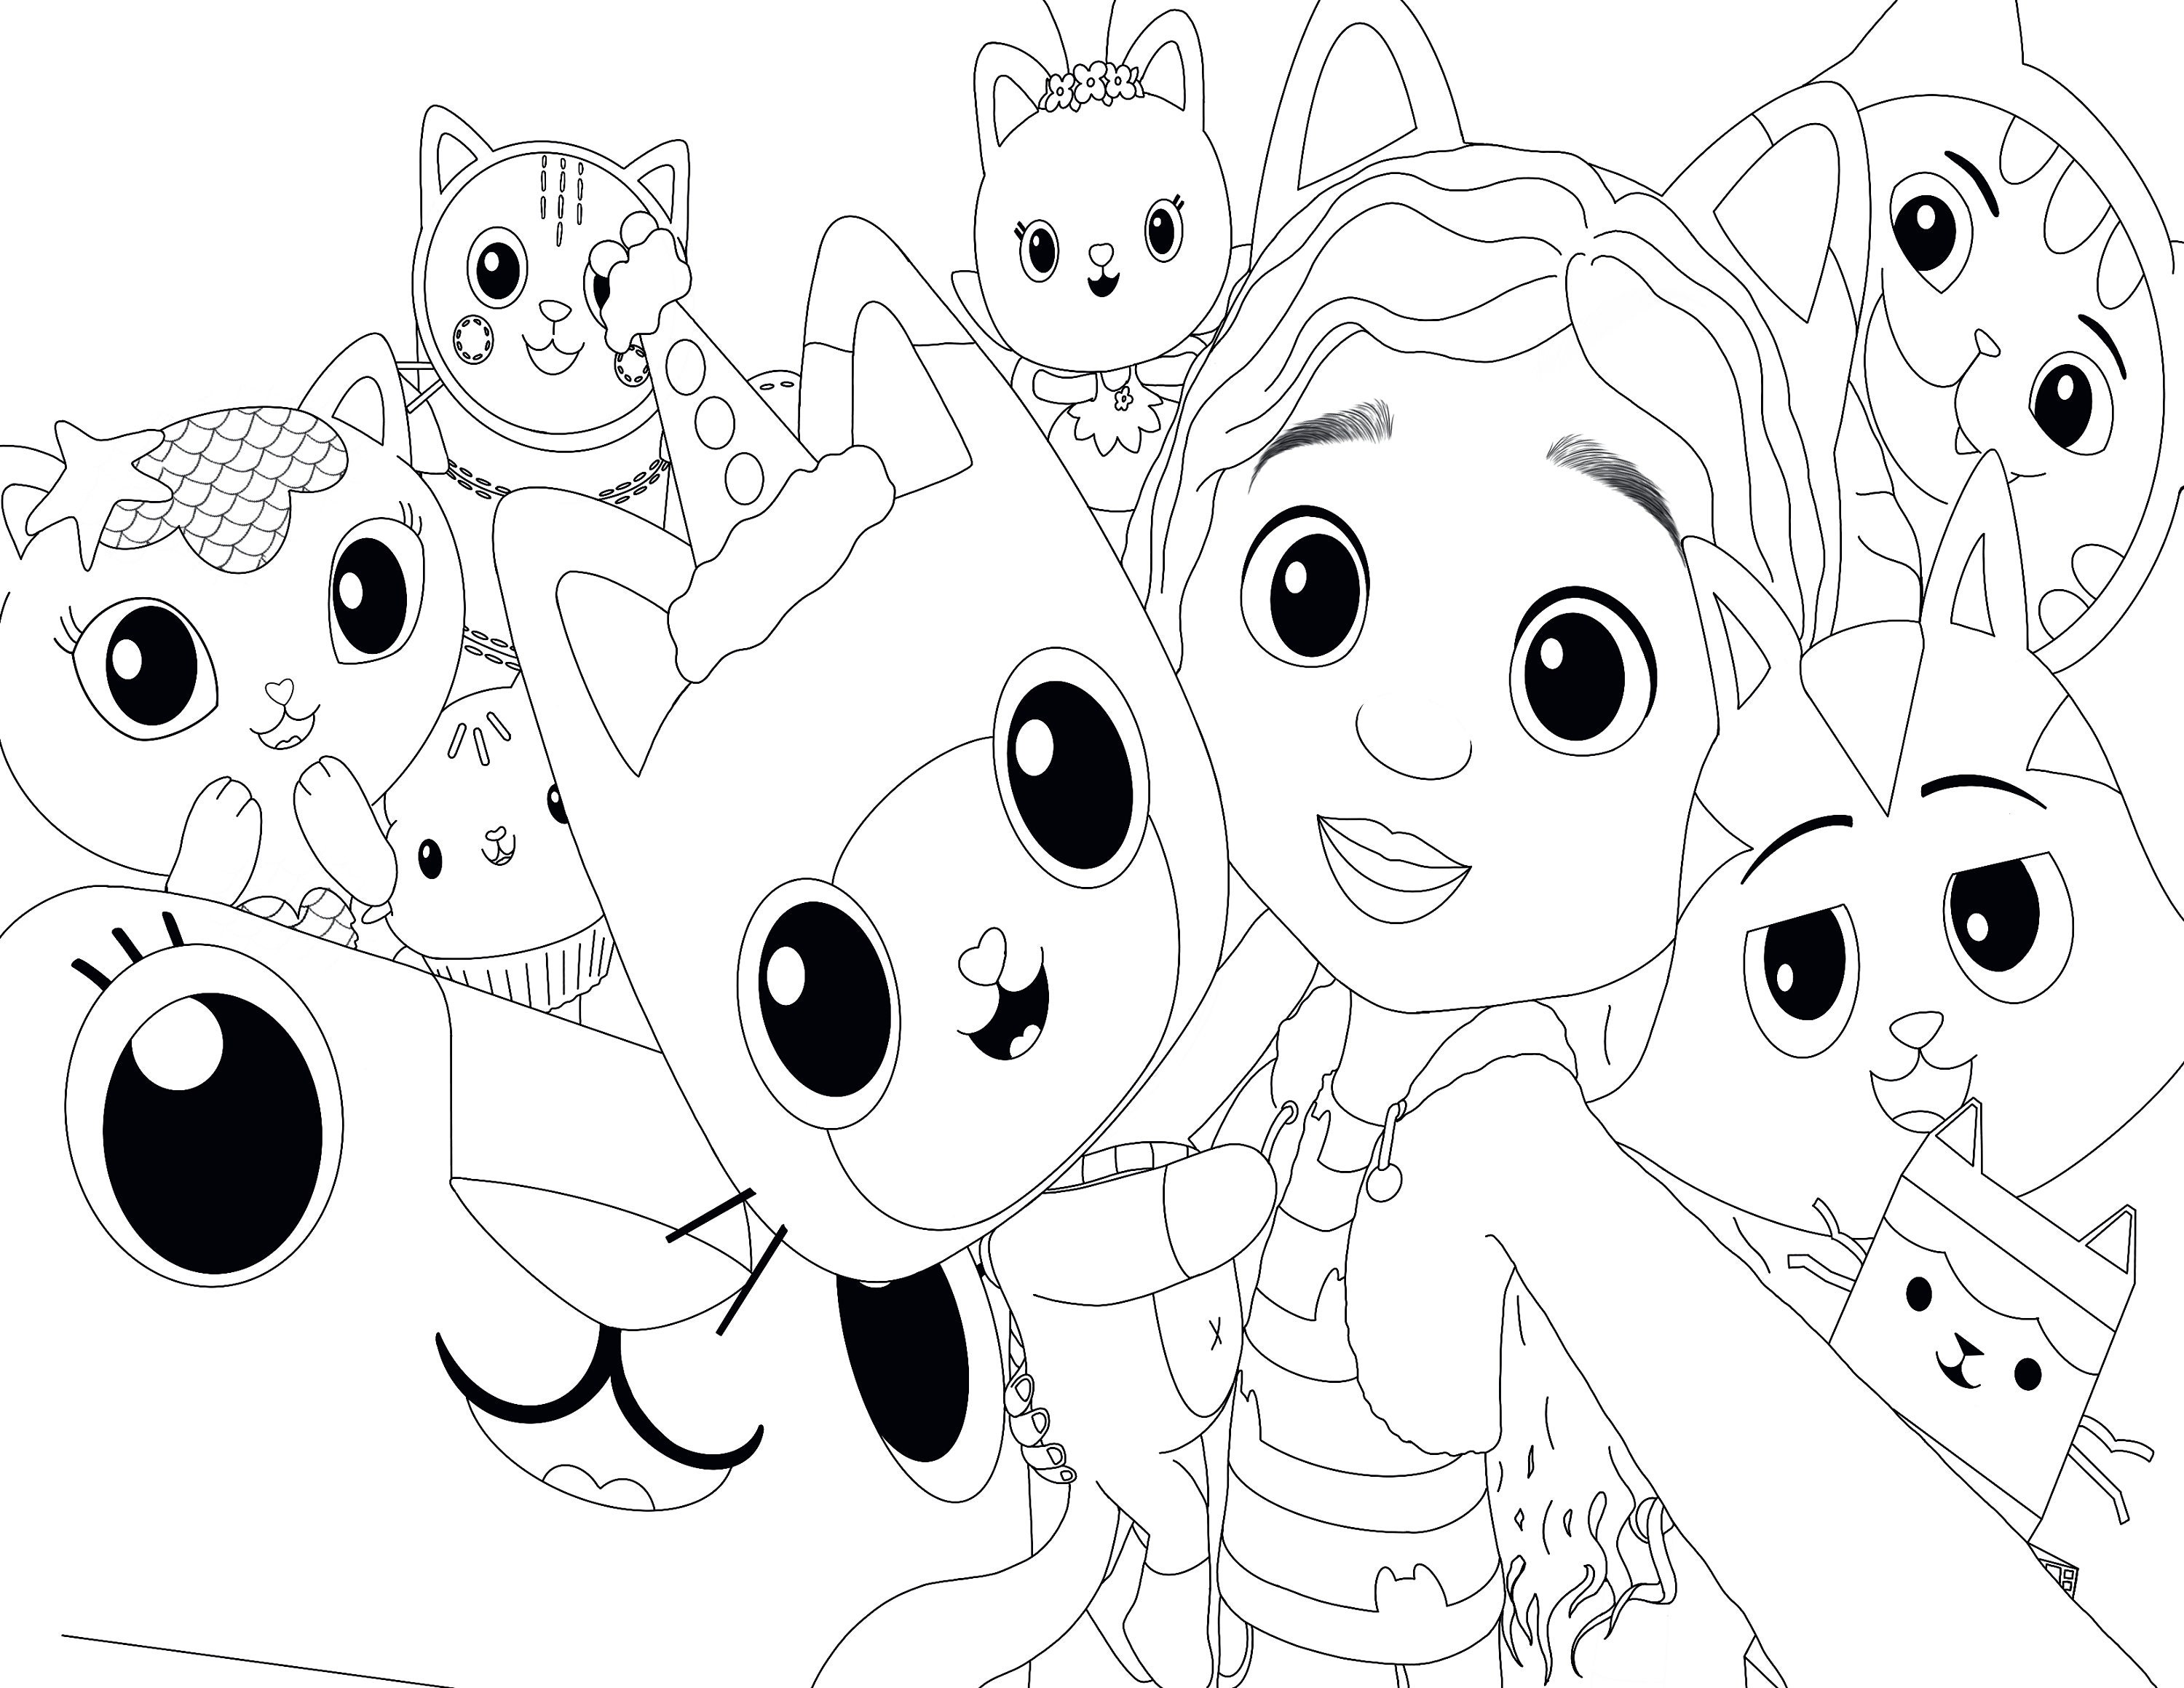 Gabbys Doll House Digital Coloring Page ...